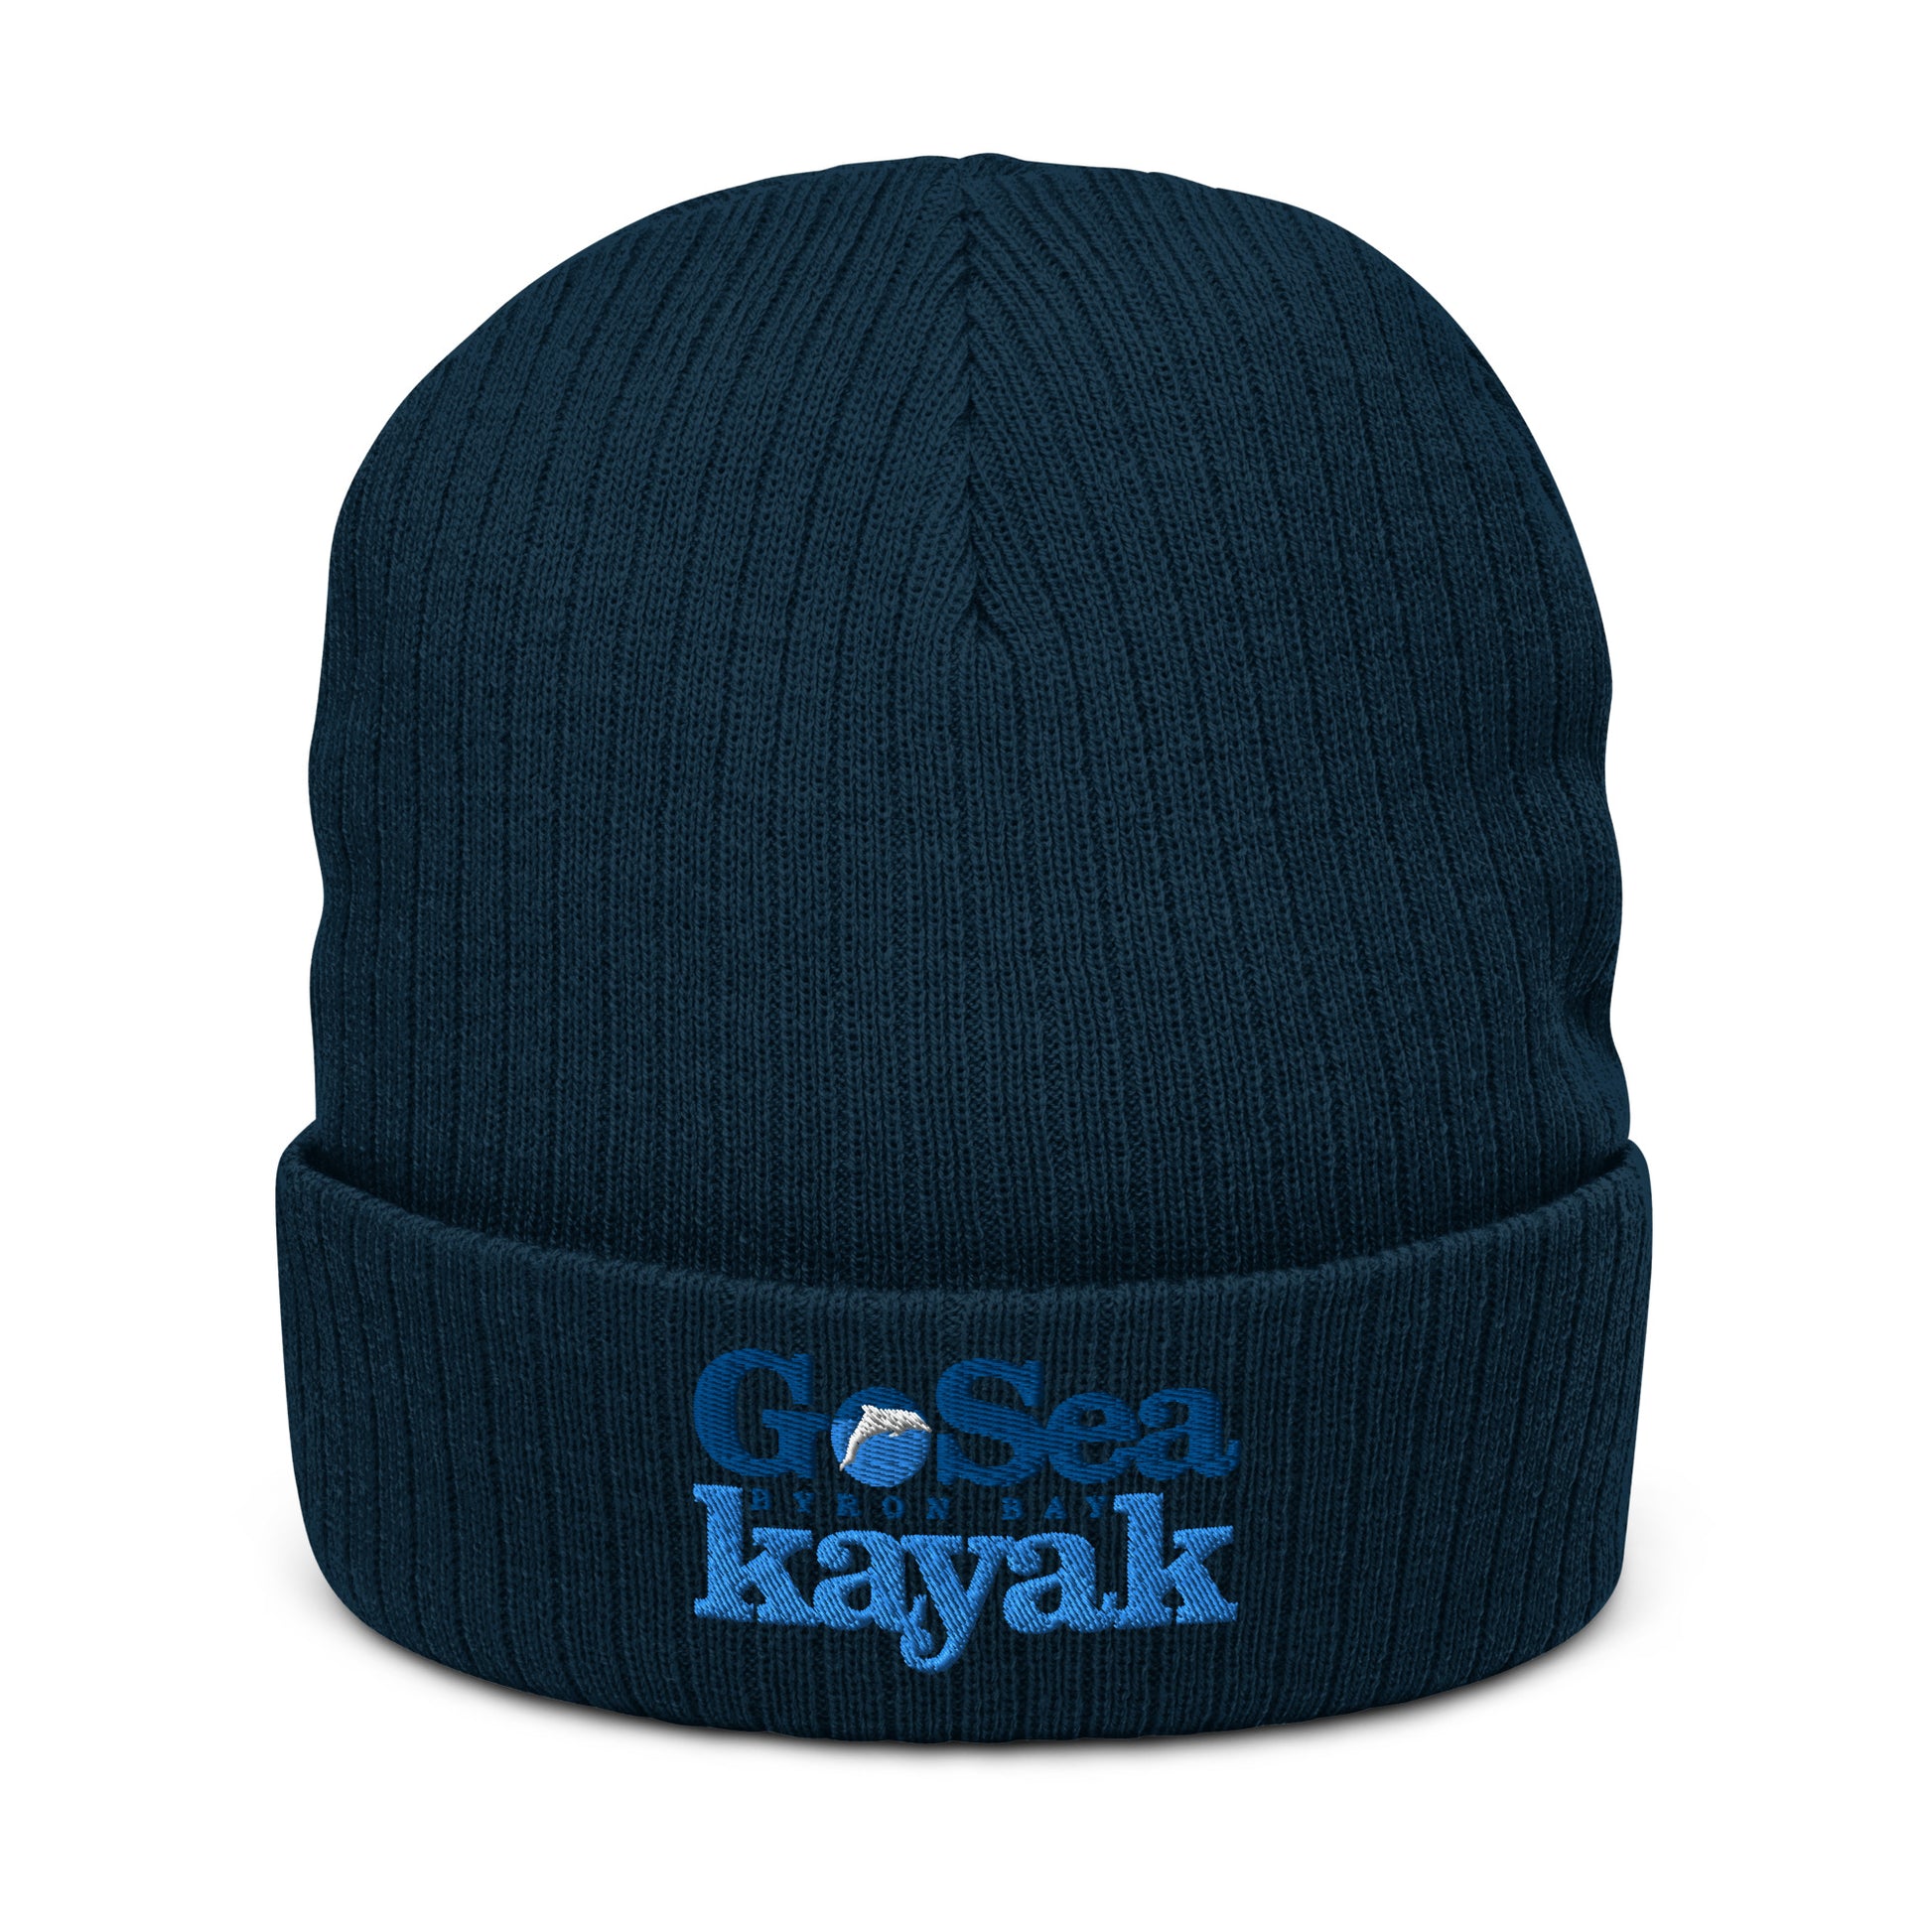  Ribbed Knit Beanie - Recycled polyester - Navy - Front view - Go Sea Kayak Byron Bay logo on front - Genuine Byron Bay Merchandise | Produced by Go Sea Kayak Byron Bay 